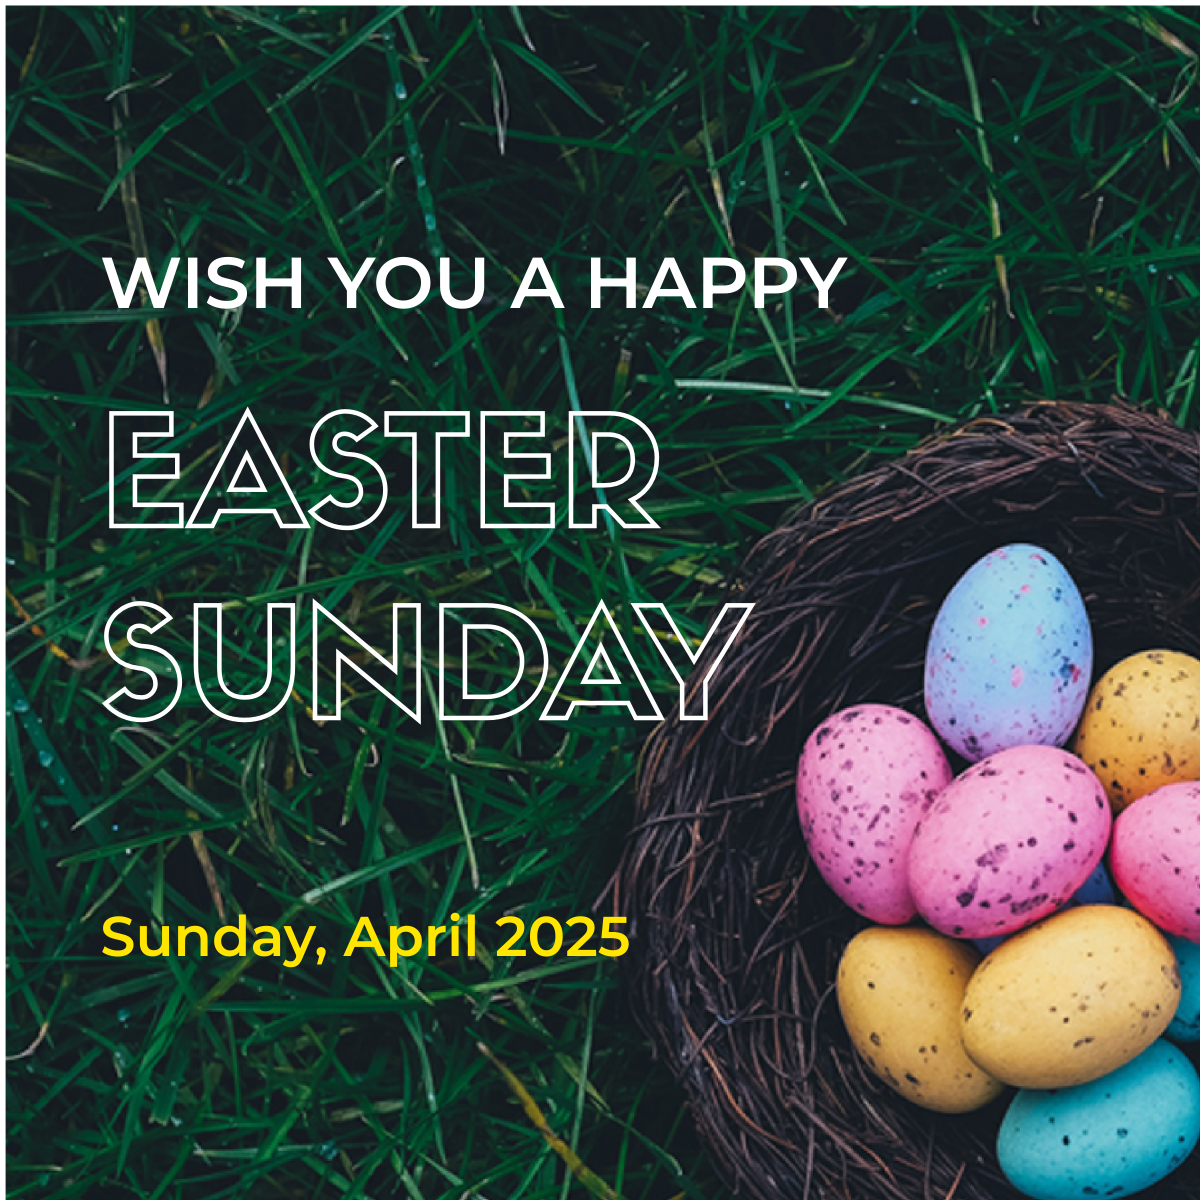 Easter Sunday Pinterest Board Cover Template